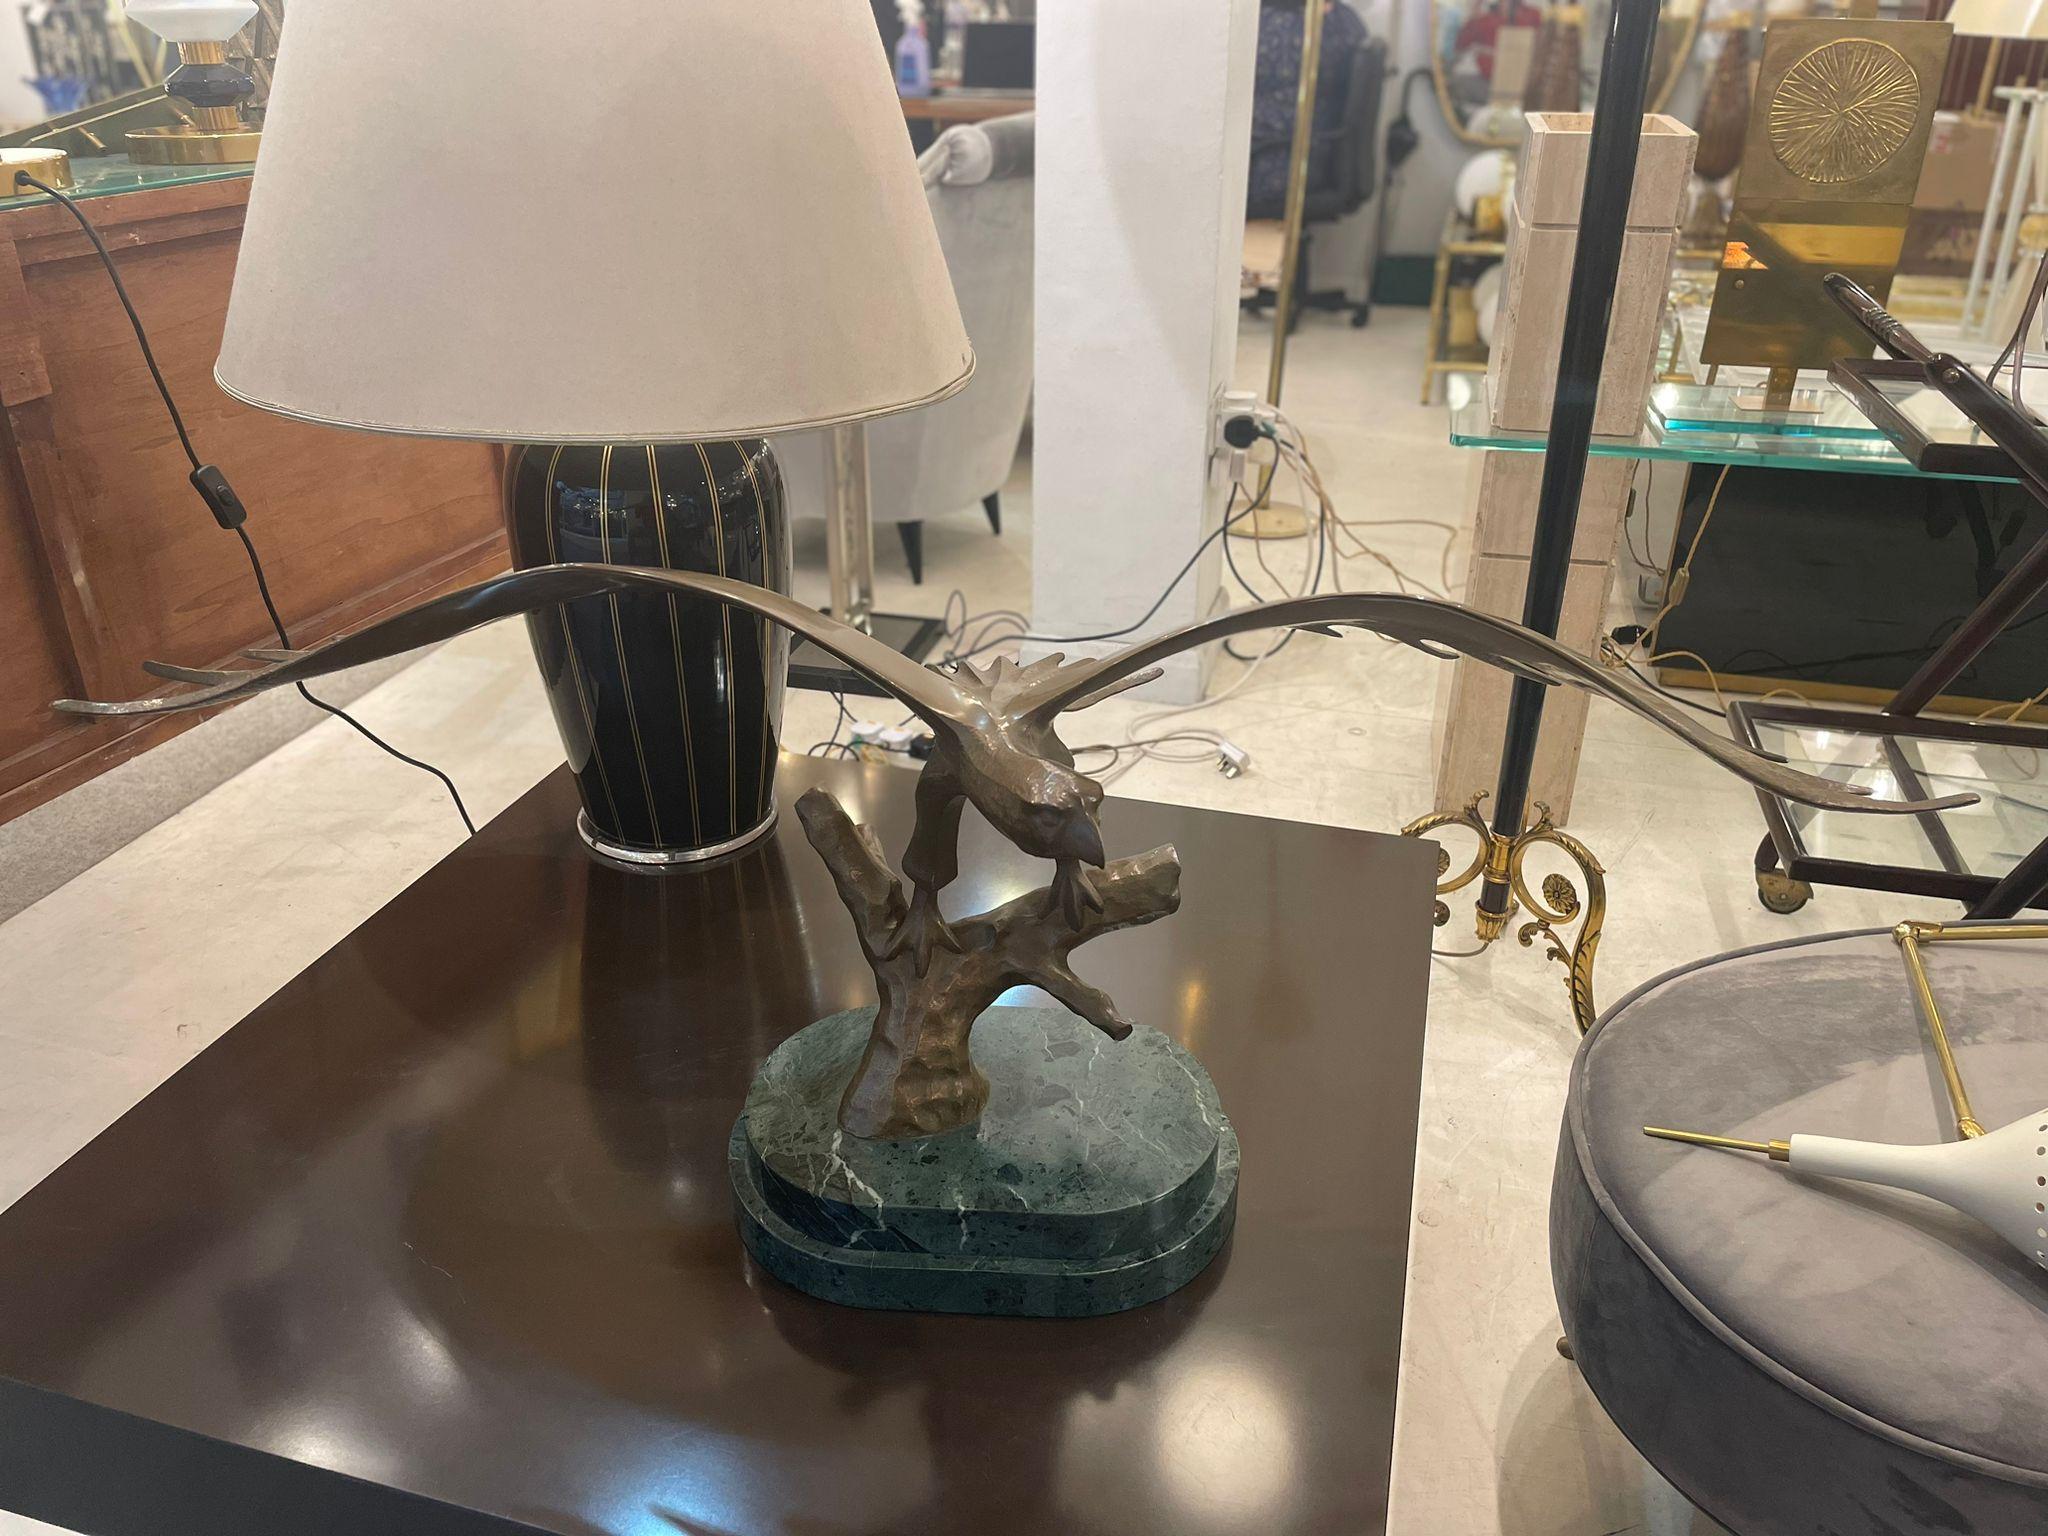 A bronze sculpture of an eagle about to take off mounted on a green marble base finely detailed, with foundry marks.
this wonderful Model of an Eagle, is bronze cast, modelled perched on a branch with its wings outstretched. The eagle measures 23cm